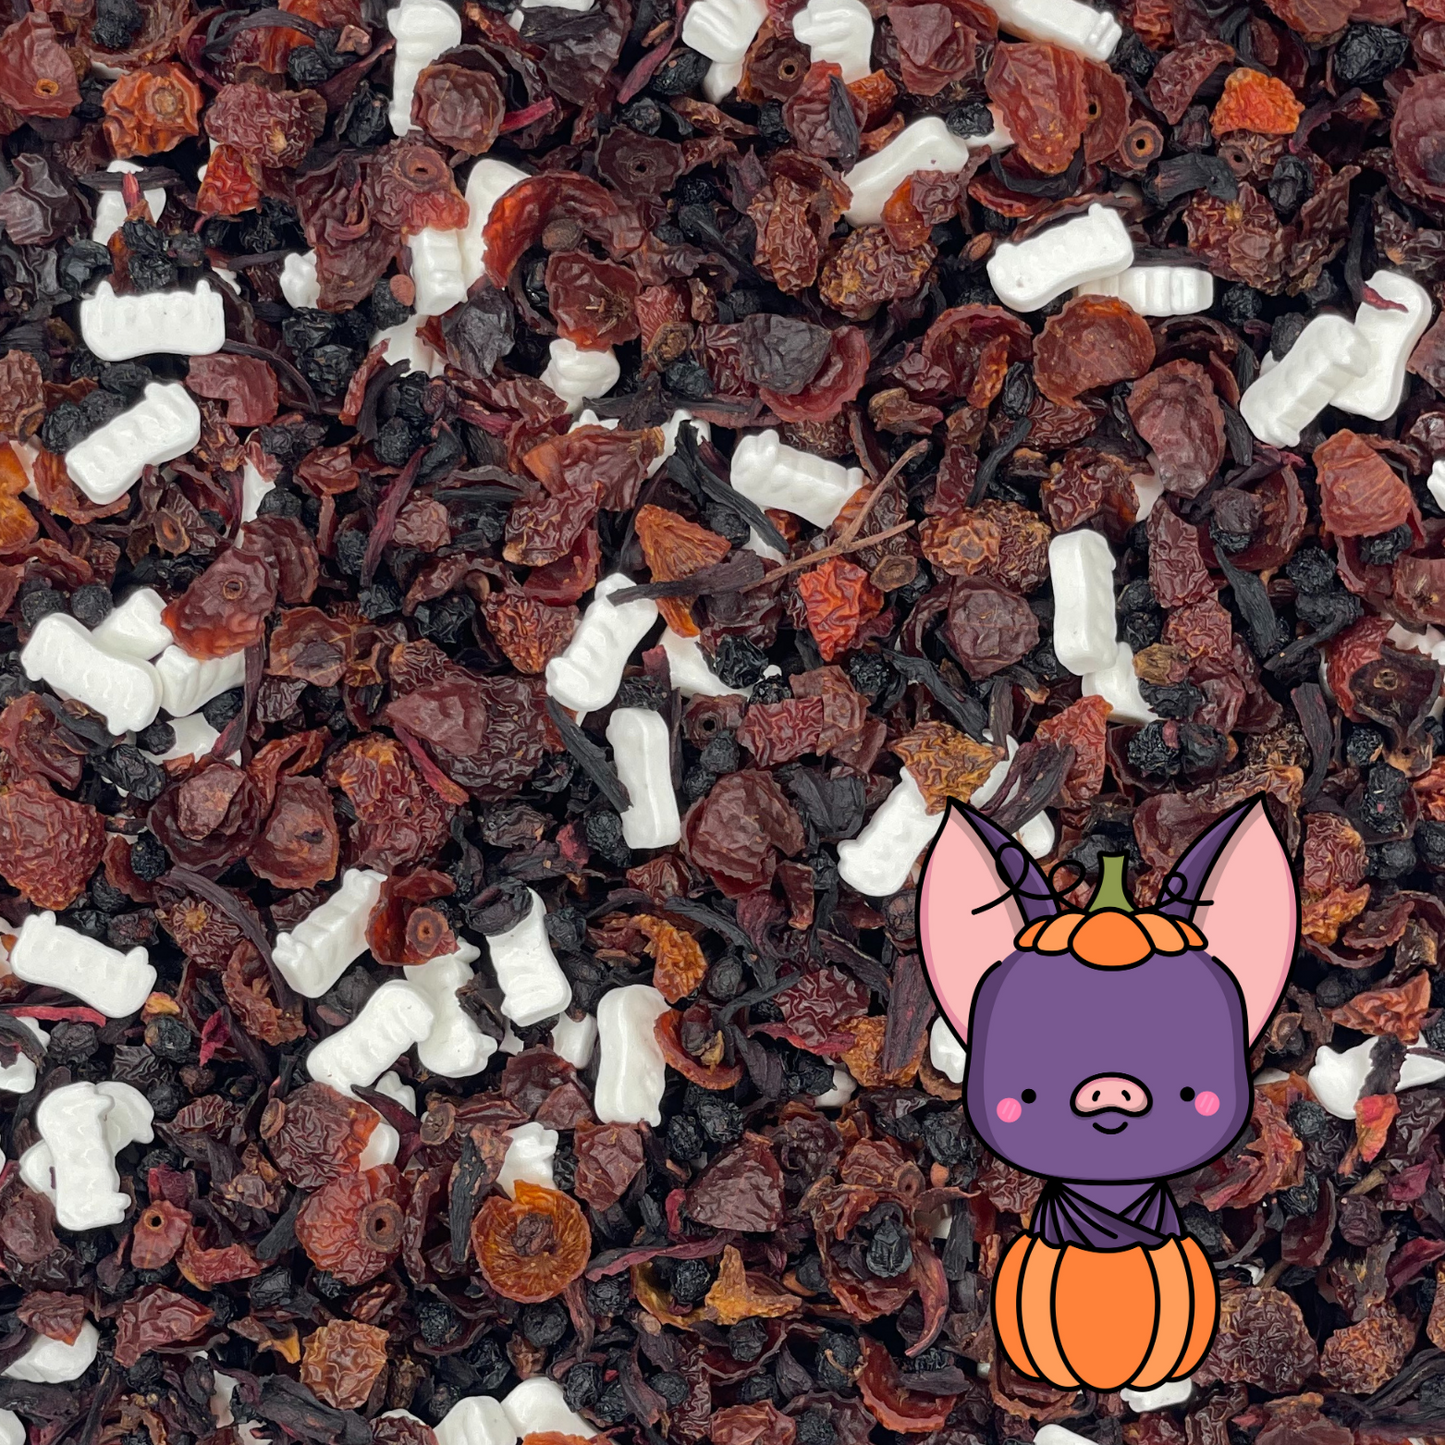 Witchy Pooh's Vampire's Kiss Loose Leaf Fruit Elderberry Herbal Tea with Candy Vampire Teeth, Caffeine Free